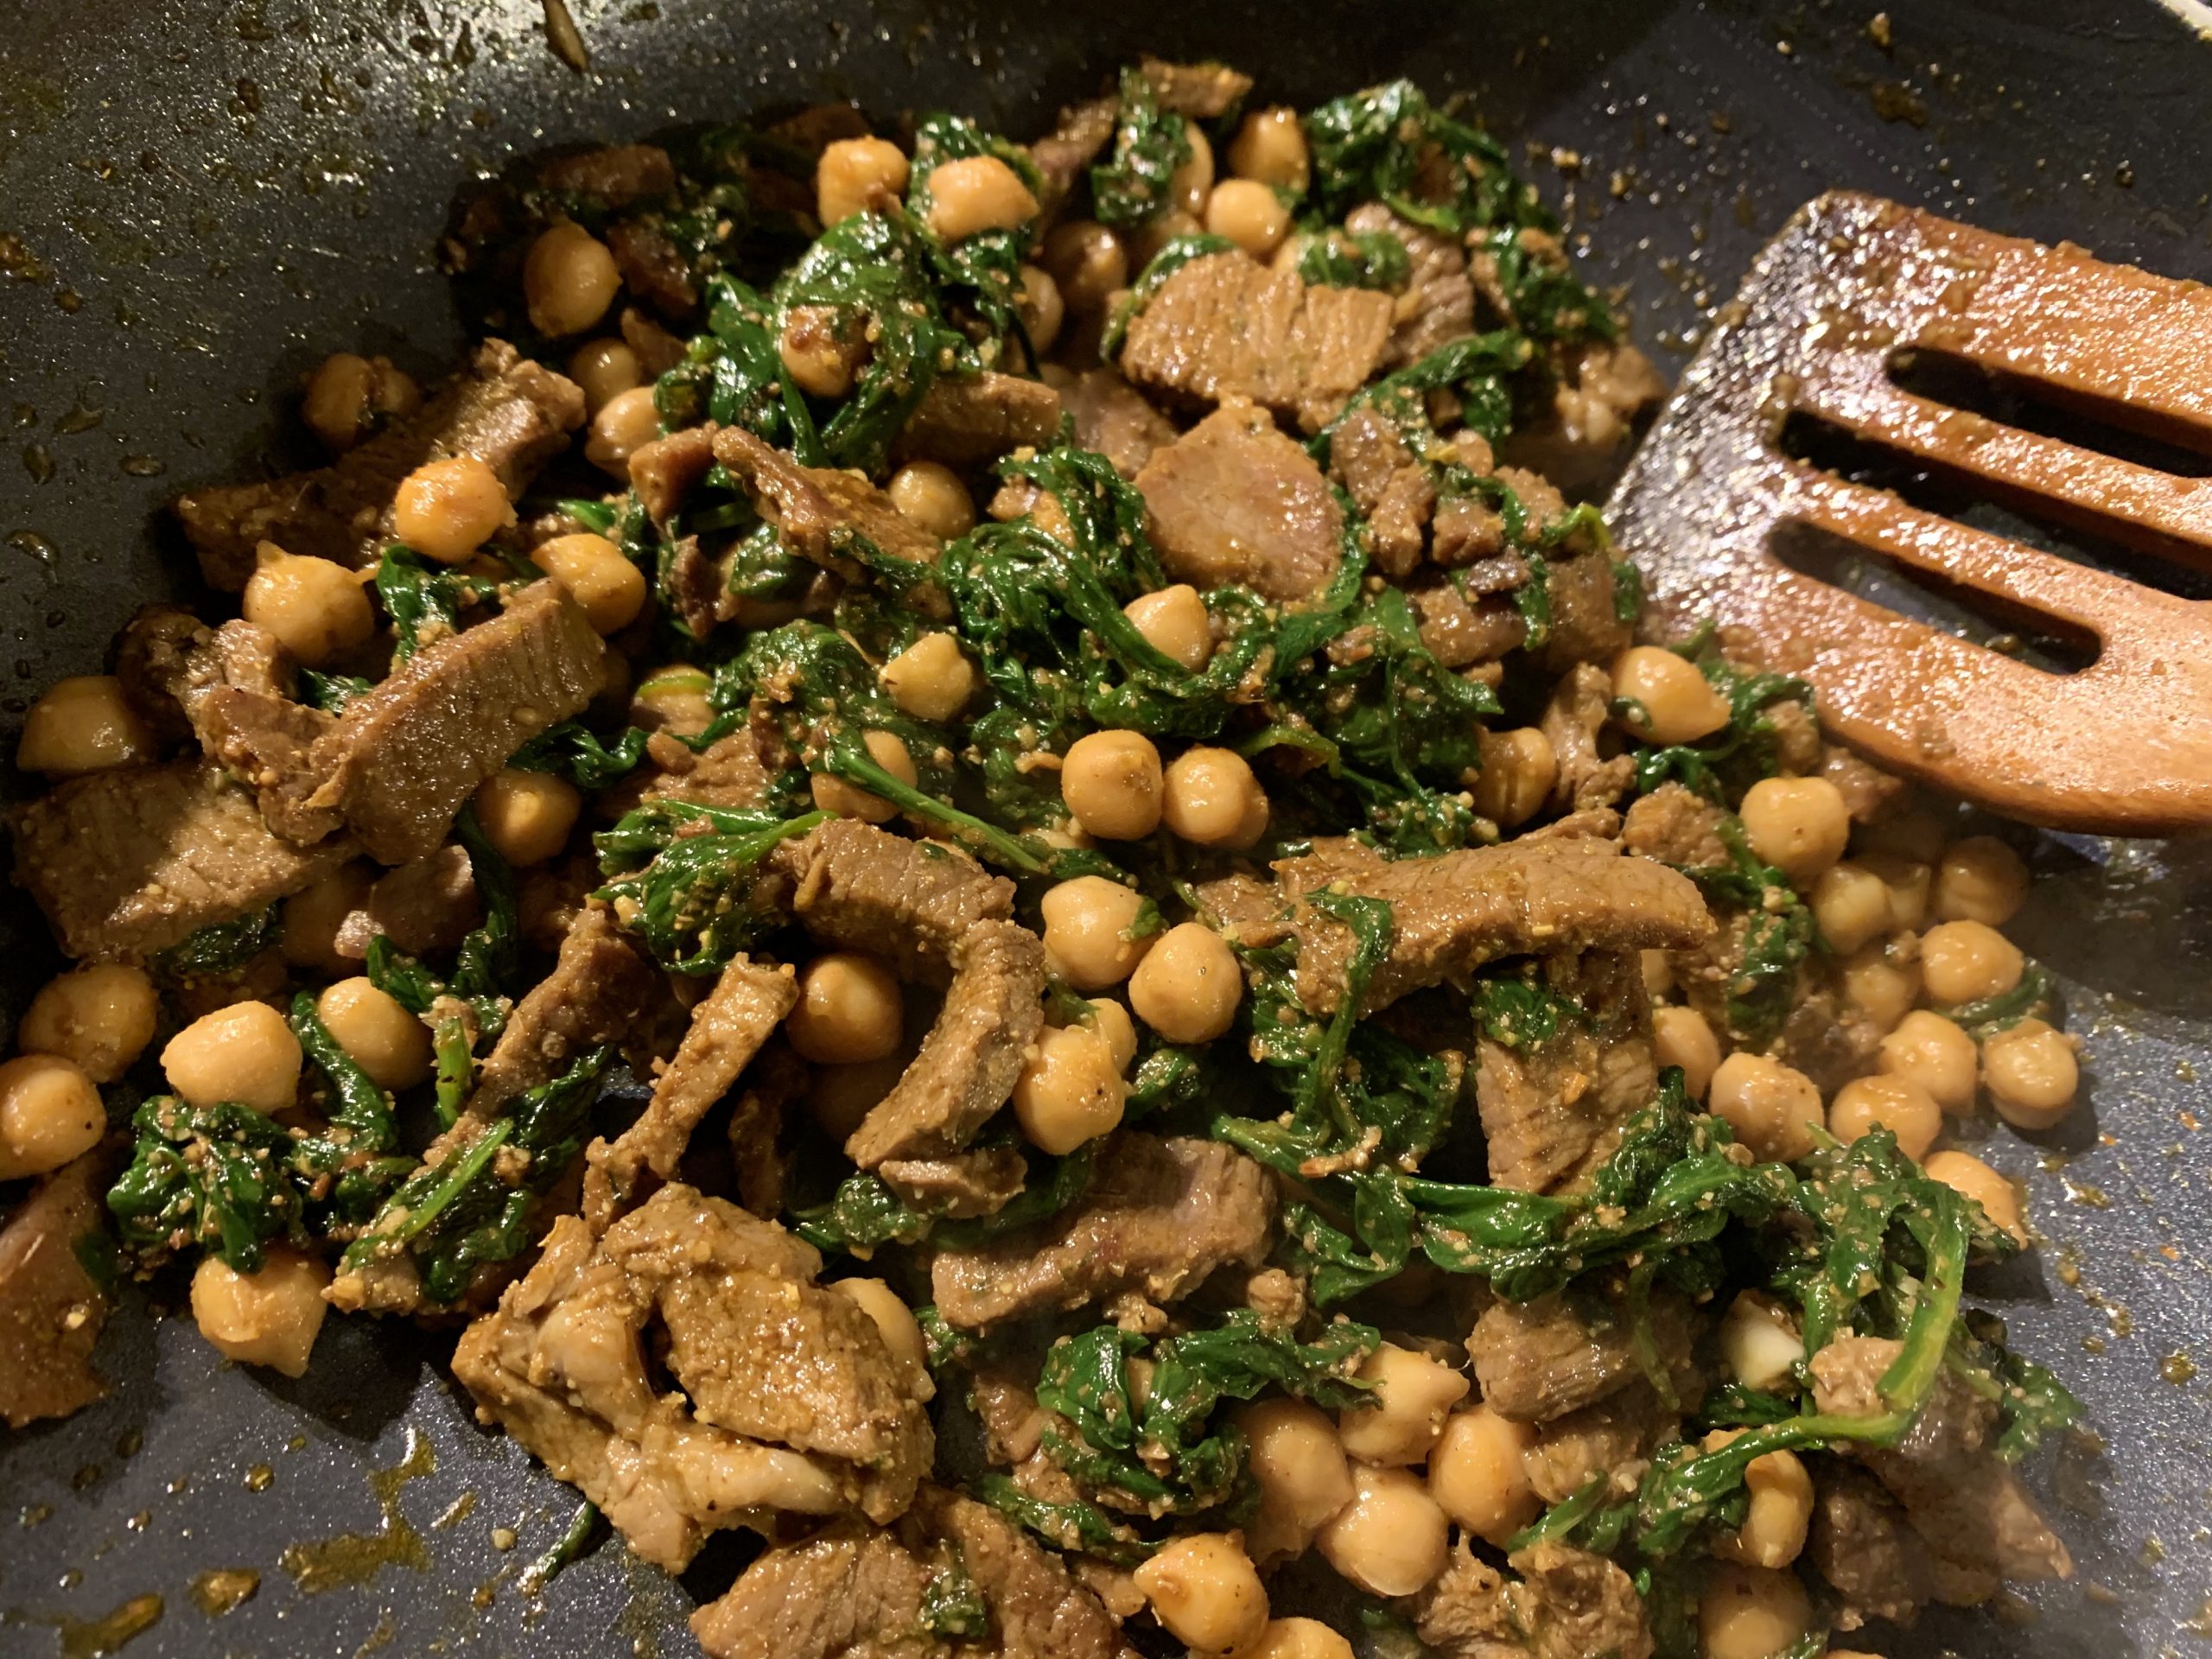 Lamb, spinach, chickpeas